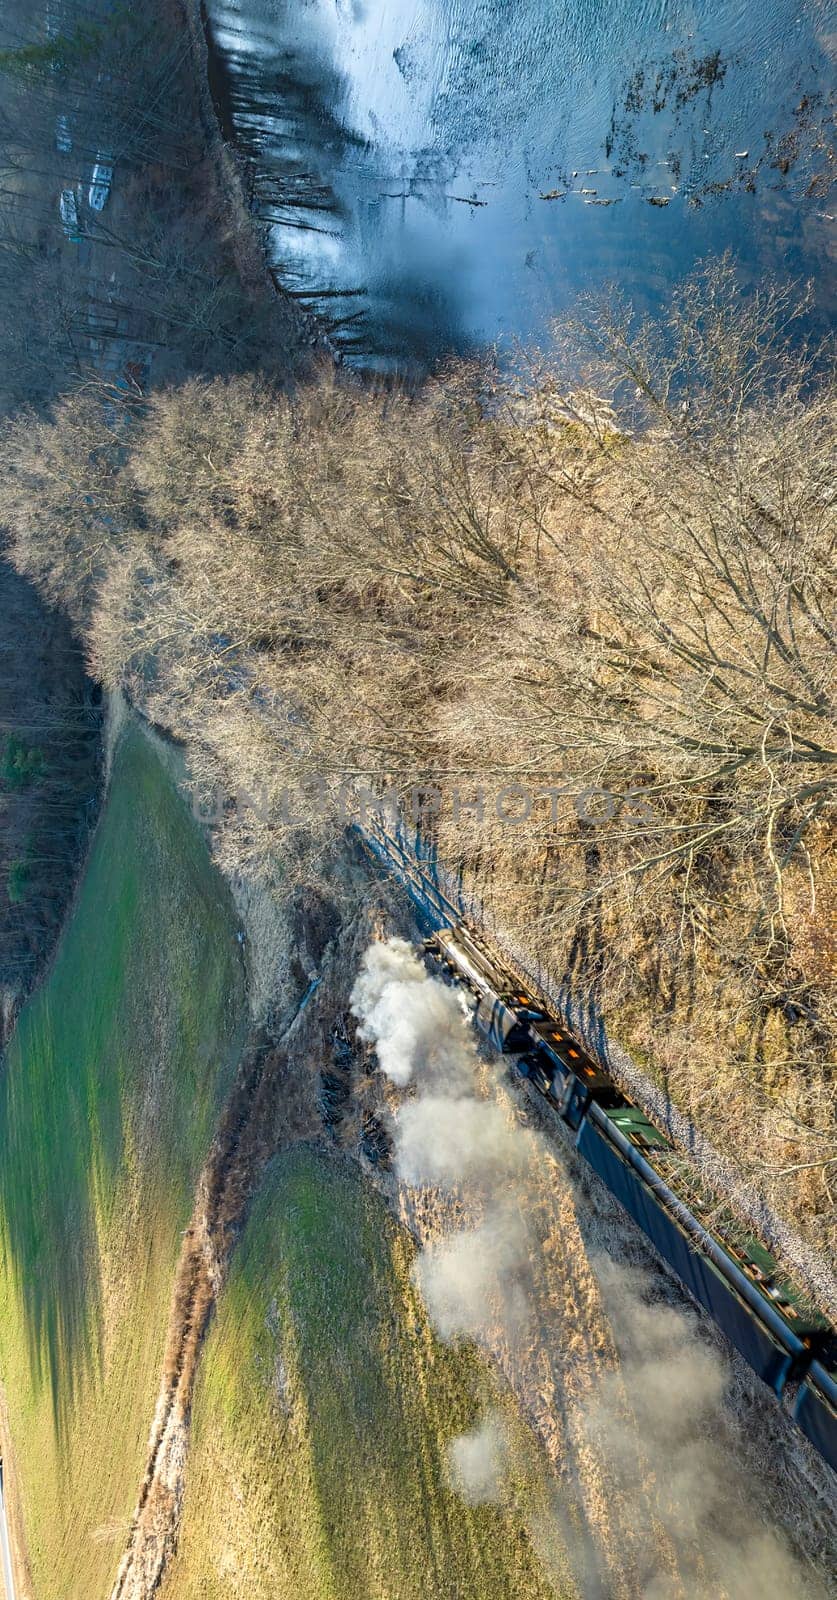 Shirleysburg, Pennsylvania, February 19, 2023 - An Aerial View of a Narrow Gauge Restored Passenger Train Blowing Smoke Traveling Next to a River Thru the Countryside on a Beautiful Sunny Day